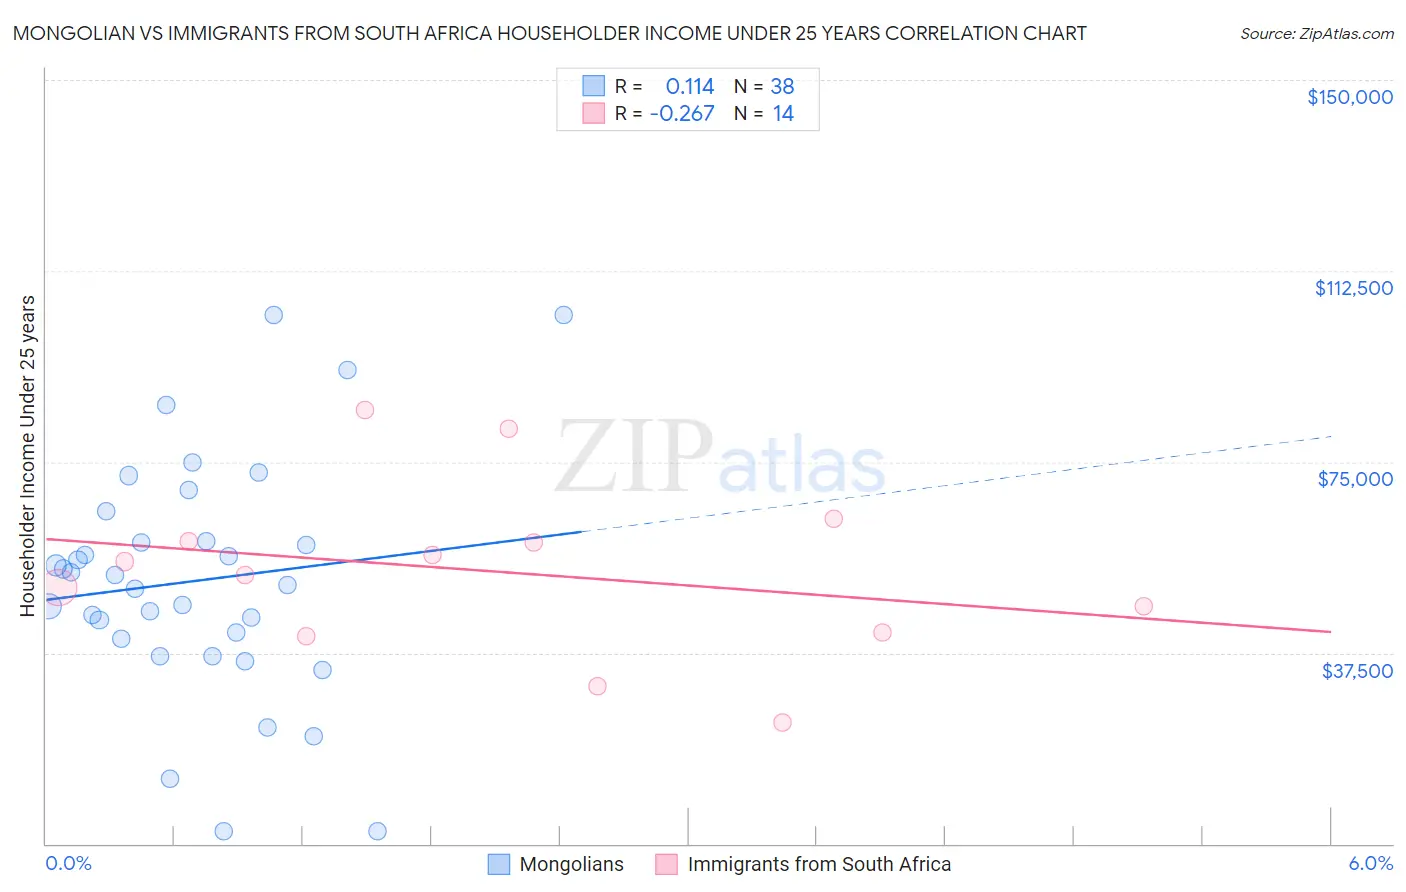 Mongolian vs Immigrants from South Africa Householder Income Under 25 years